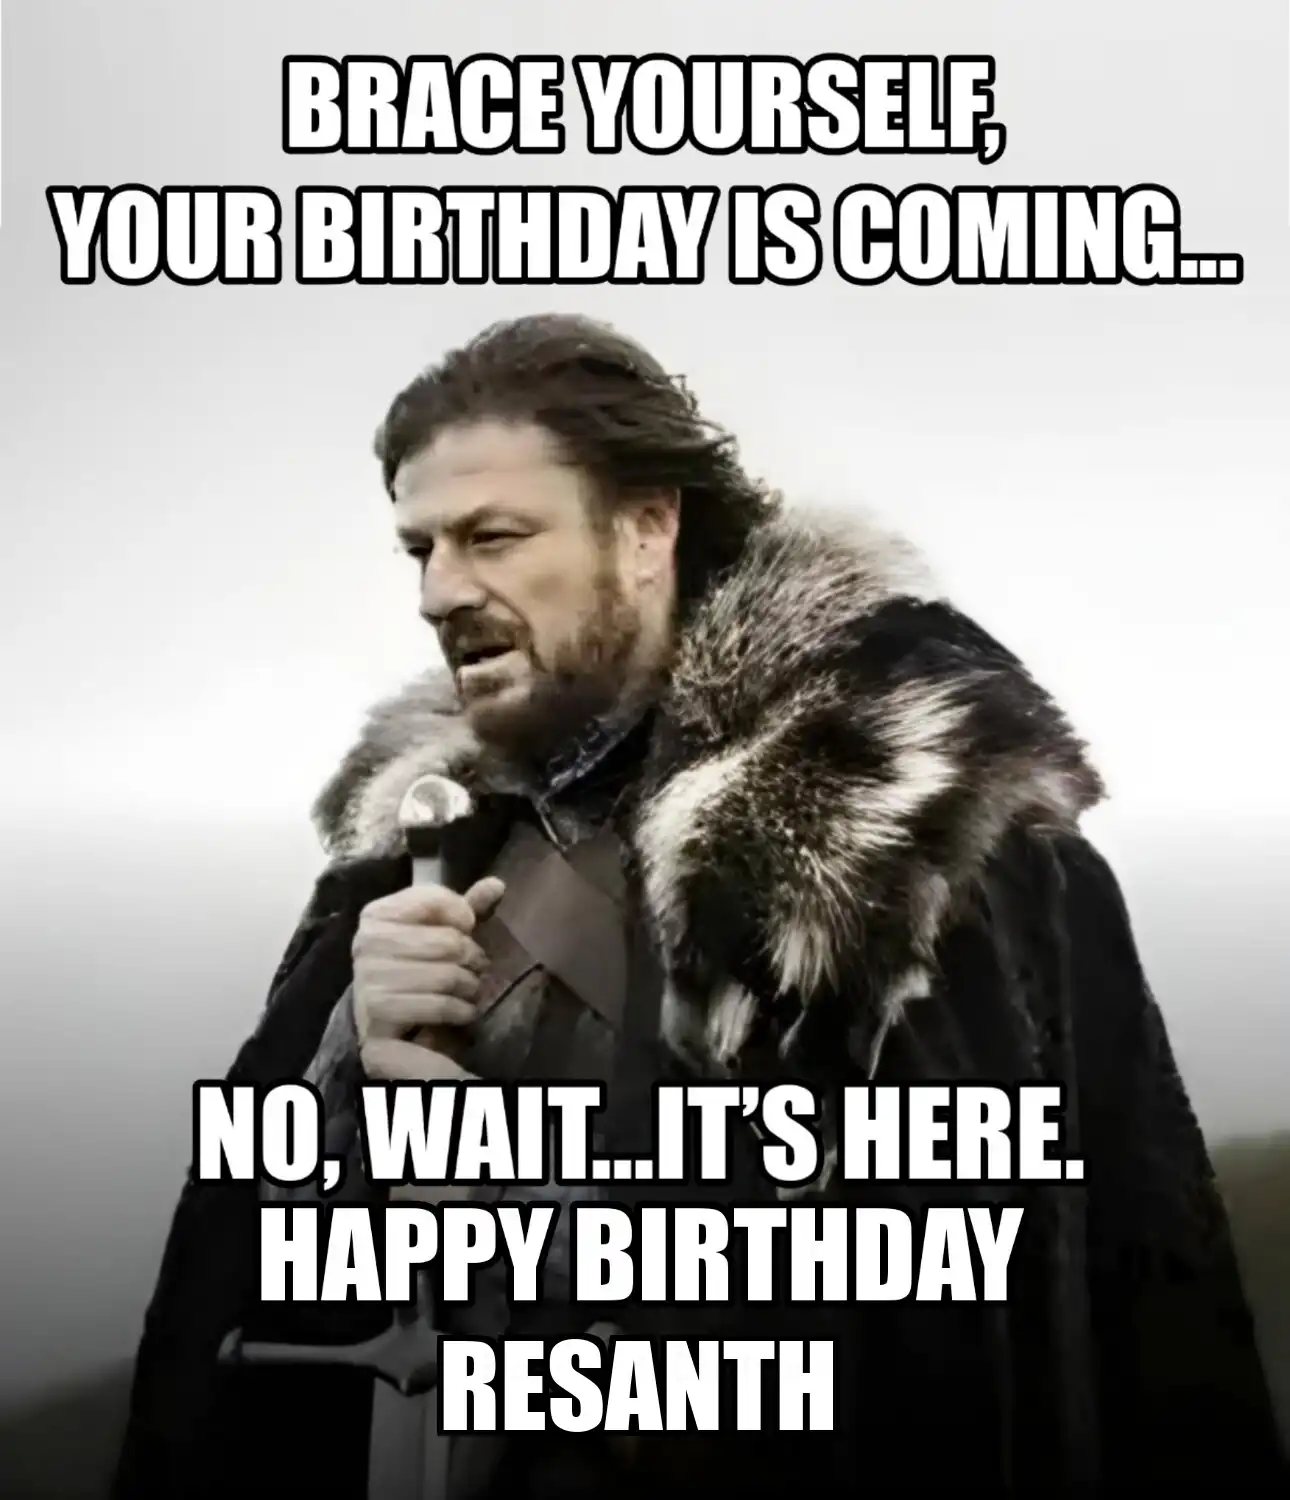 Happy Birthday Resanth Brace Yourself Your Birthday Is Coming Meme